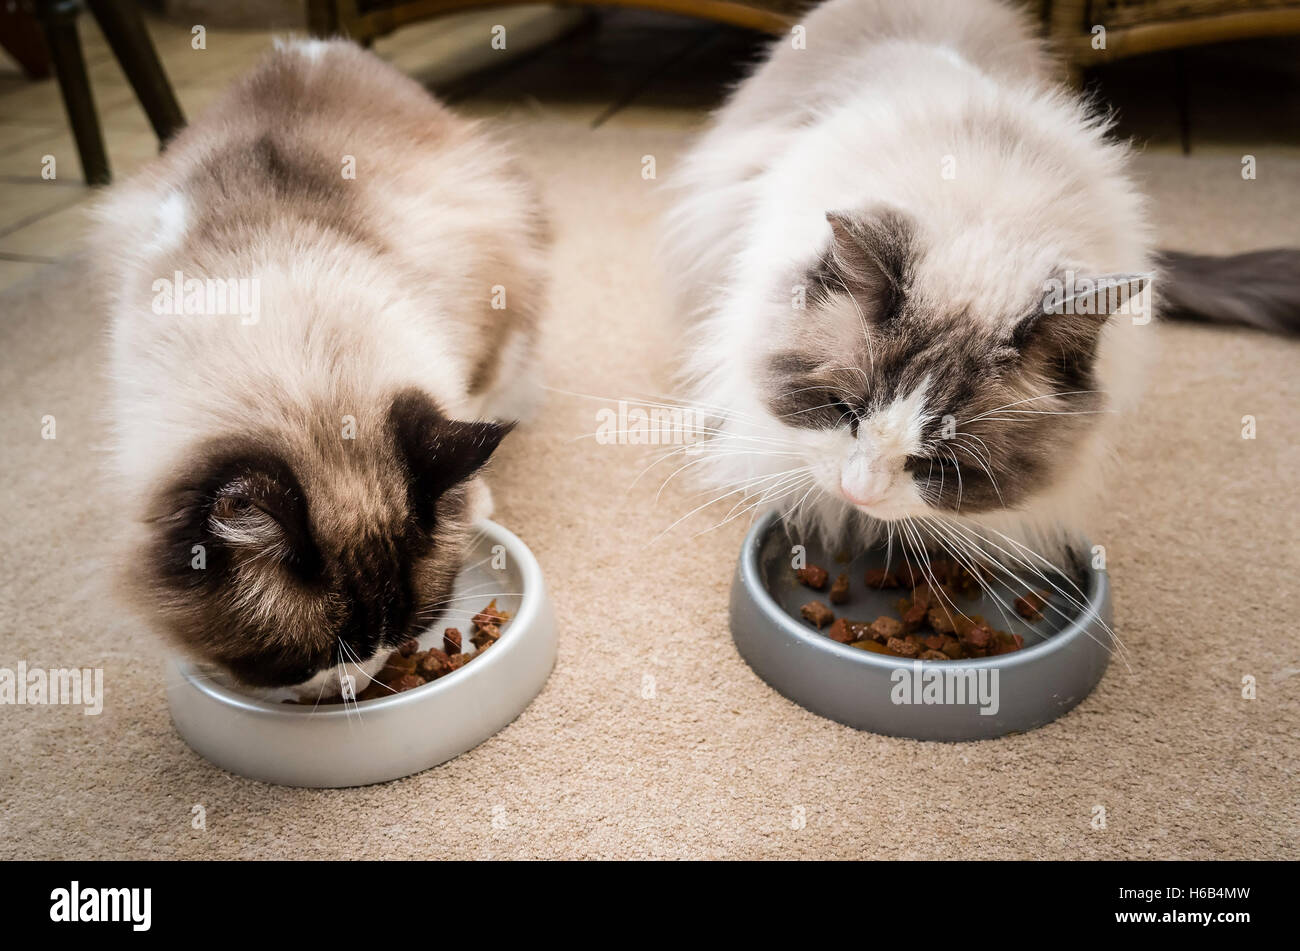 Two Ragdoll cats feeding side by side indoors Stock Photo